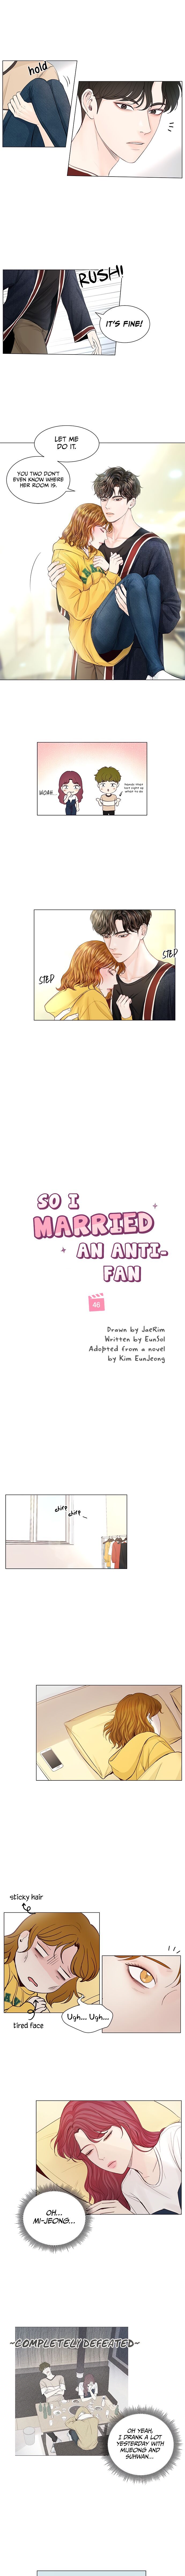 So I Married An Anti-Fan Chapter 046 page 4